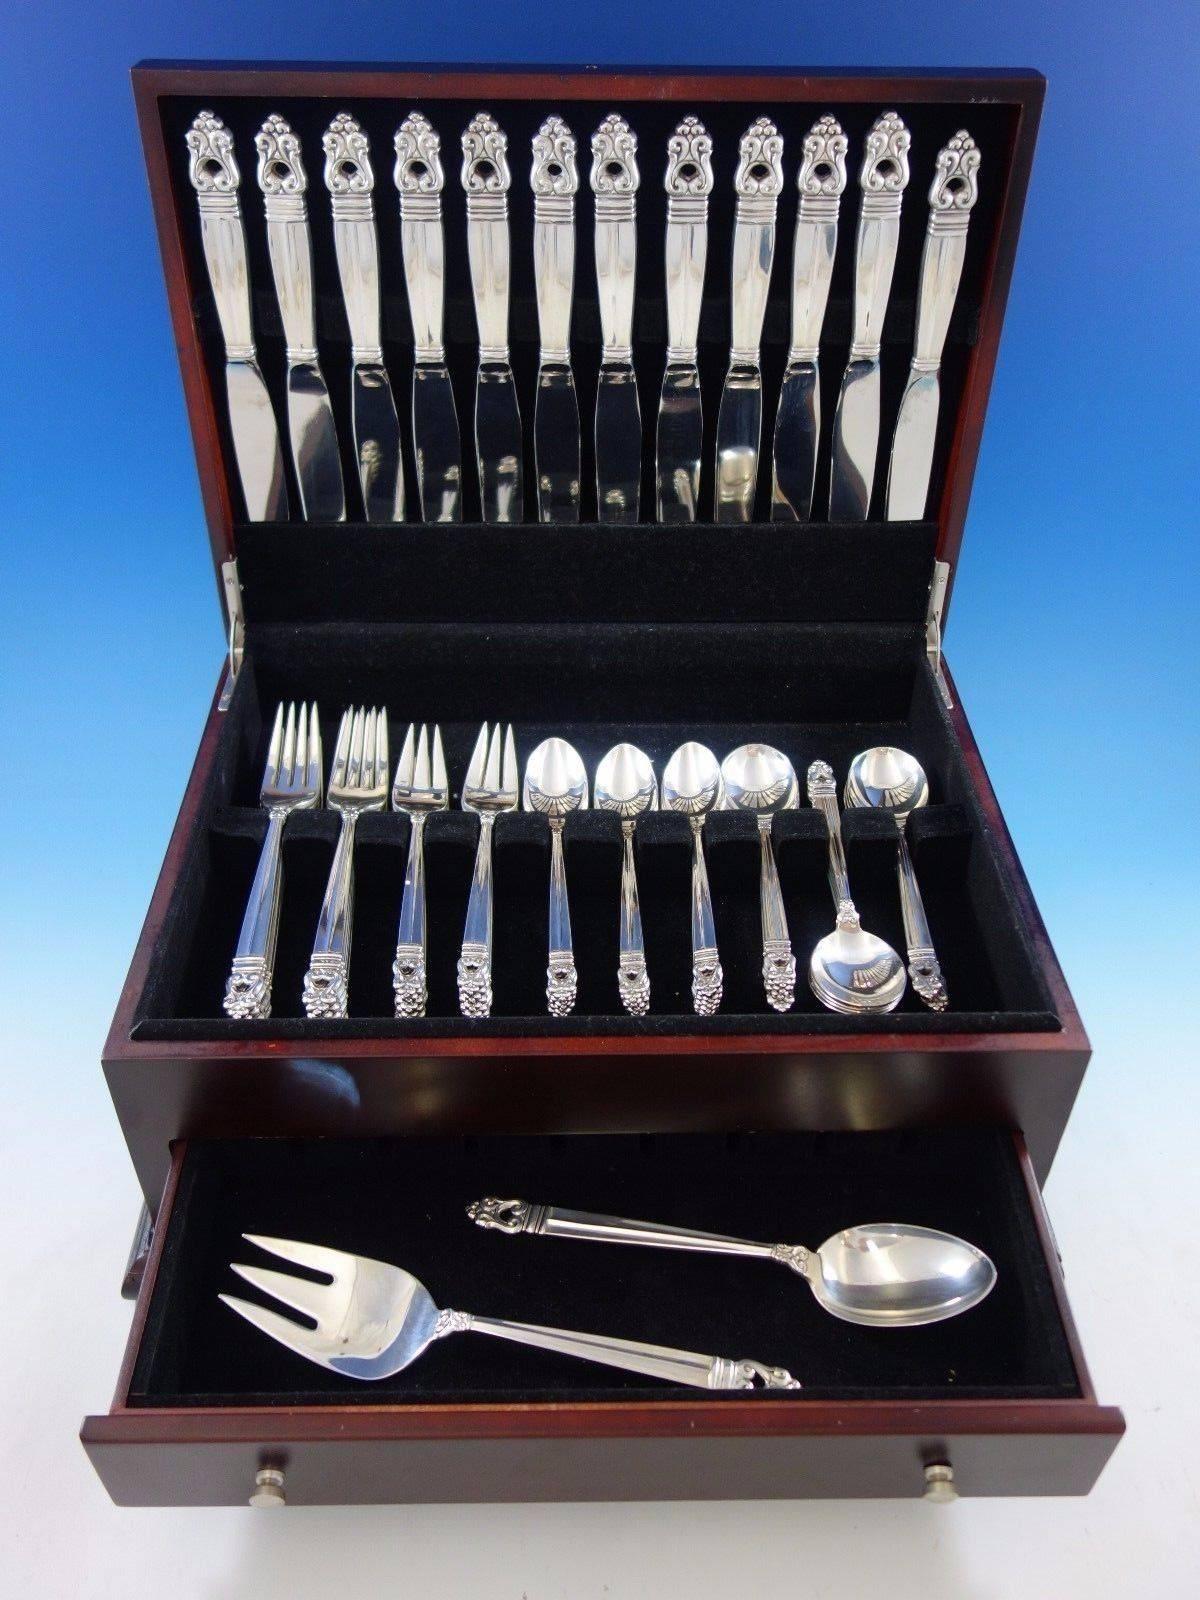 Royal Danish by International dinner size sterling silver flatware set, 62 pieces. This set includes: 

12 dinner knives, 9 3/4